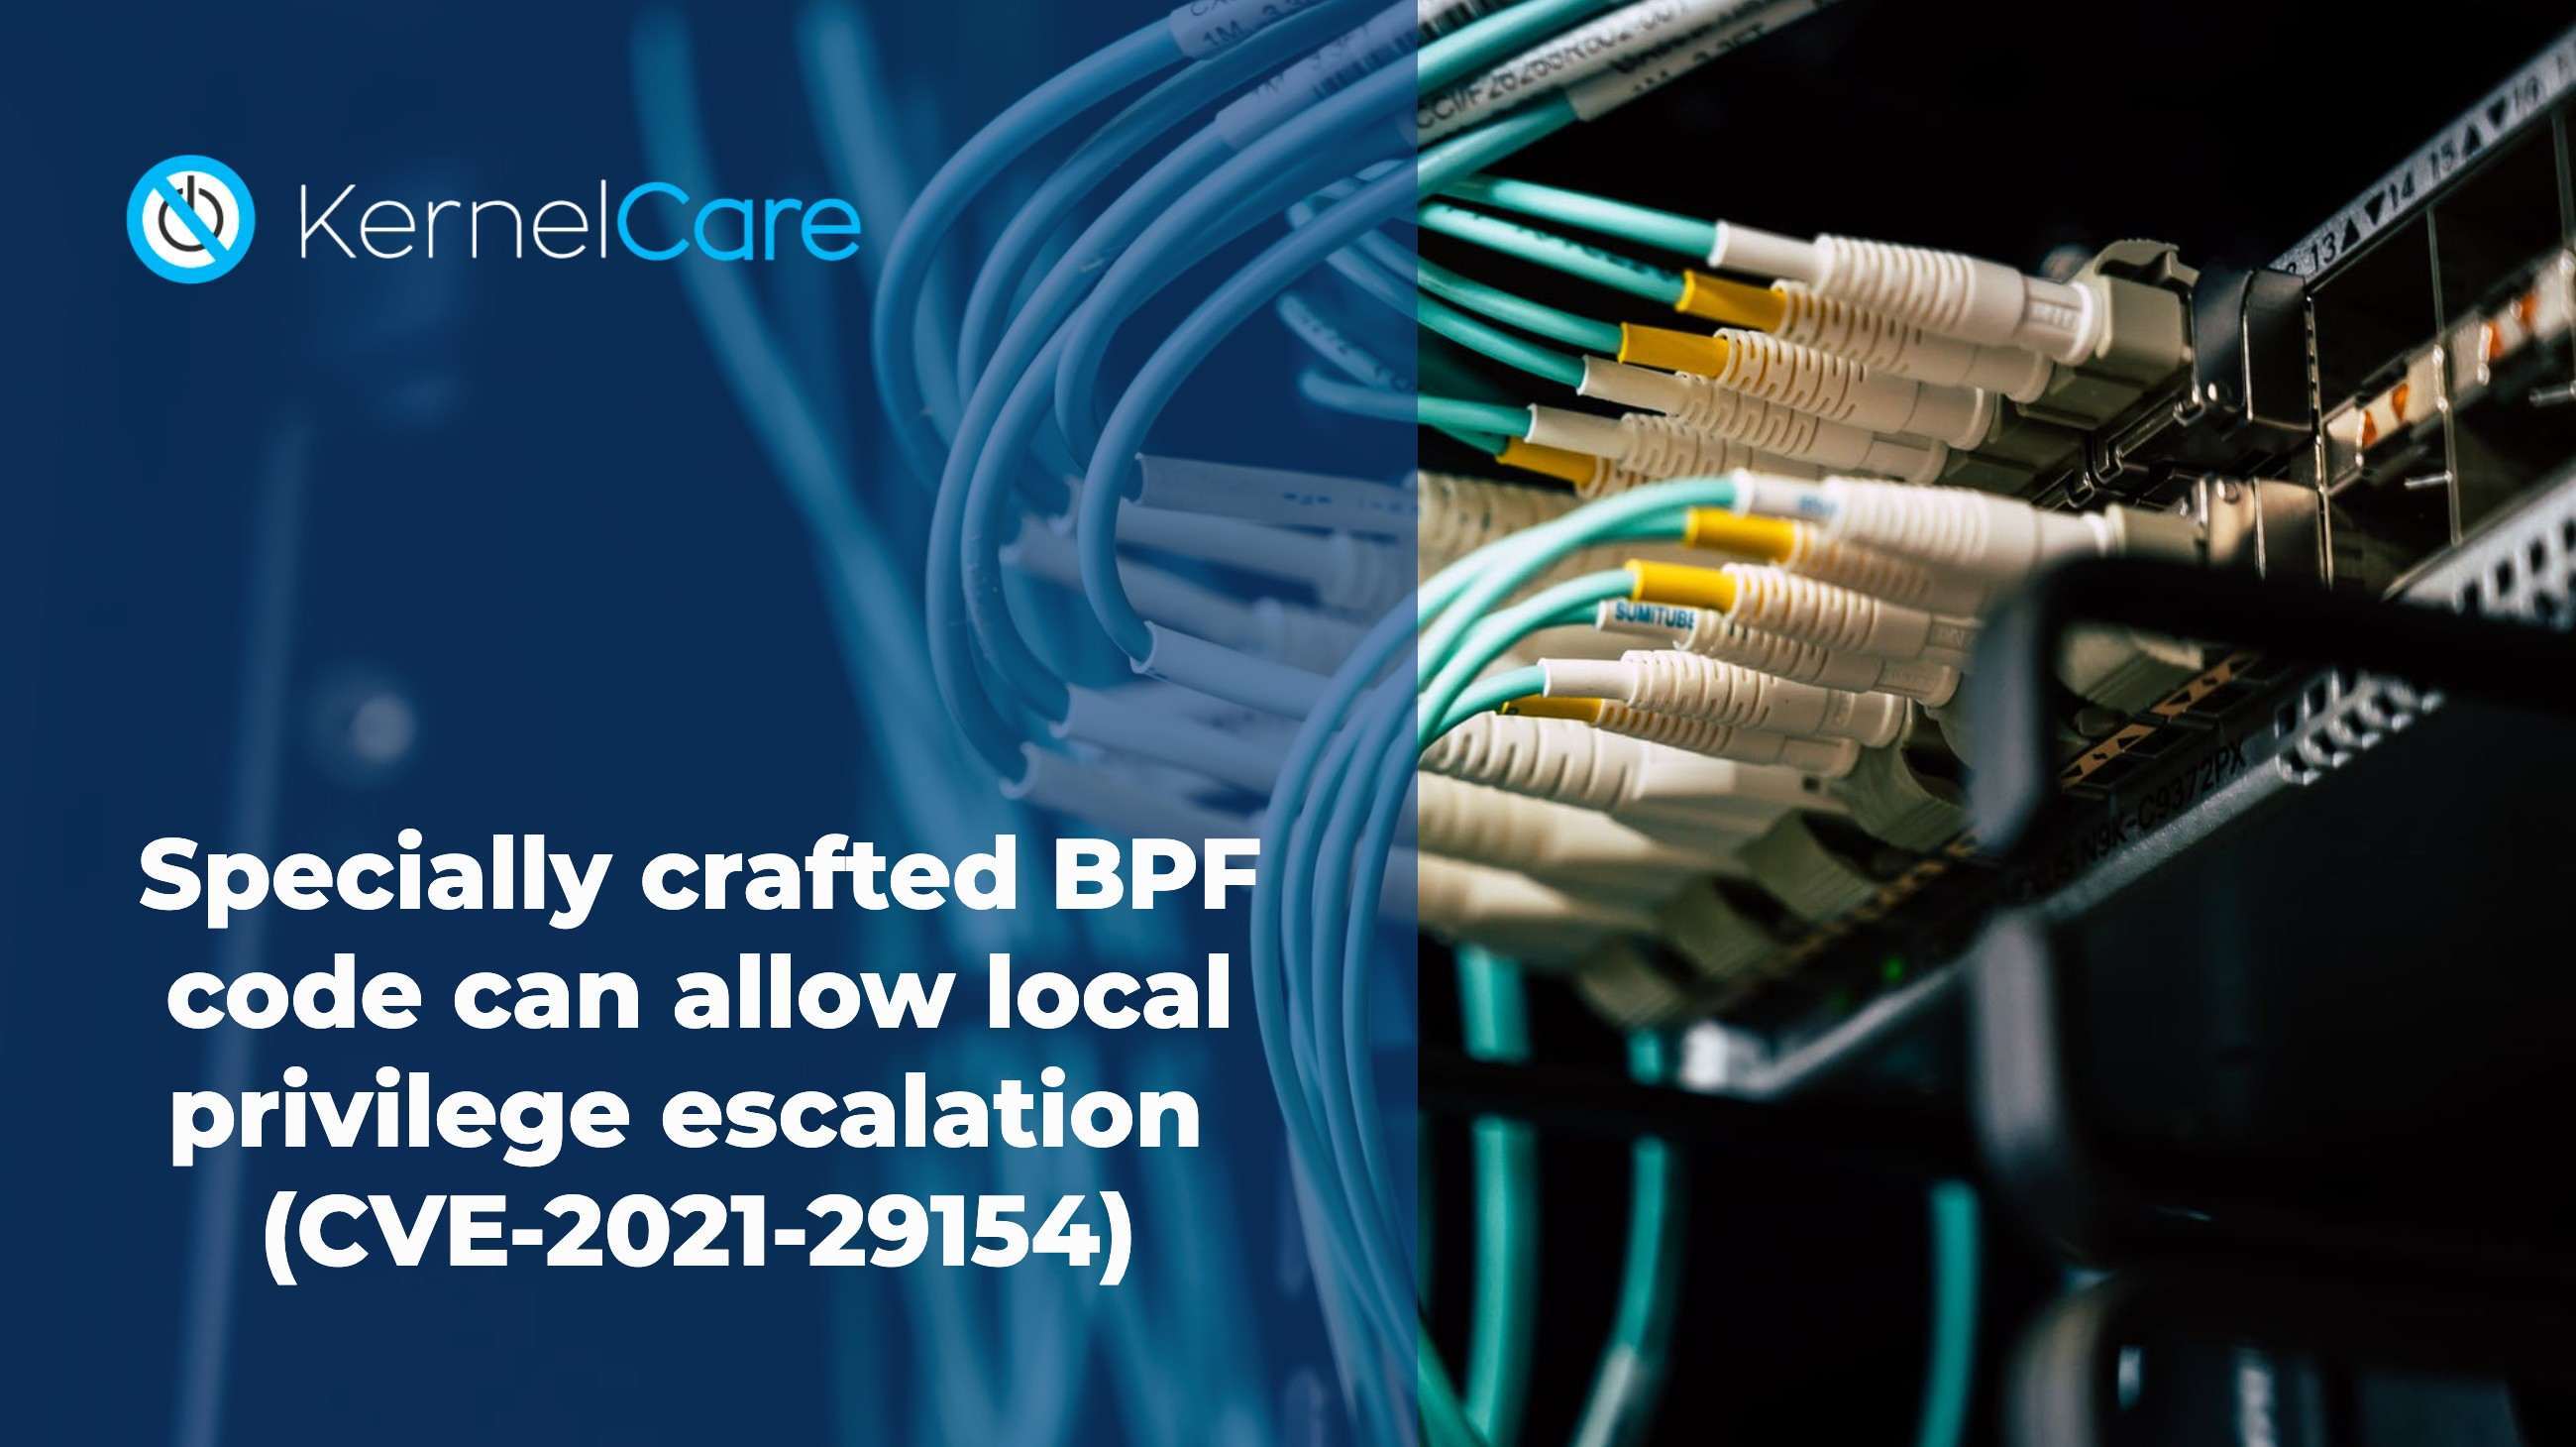 Another vulnerability targeting the BPF subsystem has been disclosed publicly in the past few days (CVE-2021-29154). It allows users on a system running non-default configuration of the BPF subsystem to run specially crafted code as a BPF filter and run arbitrary executable code in the kernel context.   According to vendors, it affects all distributions running kernels up to version 5.11.12. Distribution vendors are starting to deliver patches through their update mechanisms, and KernelCare is also finalizing patches for it’s rebootless patching process to address this issue.  Because of the nature of the BPF functionality, which is to allow user code to interact with network packet processing within the kernel, there is a very big potential for attack given any weakness in the implementation. This specific functionality has been addressed recently in the specter mitigation code bug discussed here.  To be vulnerable, a system would have to be configured to allow BPF JIT compilation (for example, by setting “net.core.bpf_jit_enable = 1”). This is often the case in situations where regular users are doing work related to sockets’ manipulation or in seccomp (secure computing mode) environments where permissions are granted more granularly than normal.  The actual vulnerable code resides in arch/x86/net/bpf_jit_comp.c and arch/x86/net/bpf_jit_comp32.c in the kernel source code tree. The flaw comes from the way branch displacement happens when the user code is compiled, by making wrong assumptions regarding the address of code during optimization.  Proper exploitation of this vulnerability could even lead to container or chroots’ escape, since the kernel is shared between them, and running code in the kernel context permits it to escape containerization limits.  As a stop-gap procedure, you can quickly disable BPF JIT by running:  # echo 0 ></noscript> /proc/sys/net/core/bpf_jit_enable   Which will persist until reversed or a system reboot. A more permanent removal can be achieved by using your distribution’s syscfg equivalent utility to set “net.core.bpf_jit_enable=0” at boot time. Of course, this type of solution solves the problem by disabling the functionality, which in itself is self-defeating. If you actually had your system configured to use BPF JIT, in all likelihood your use case needed that setting explicitly enabled, and you should rely instead on proper kernel patching, either through your distribution vendor’s patches or through KernelCare’s rebootless process.” width=”2600″ loading=”lazy” style=”width: 2600px;”></p>
<p style=